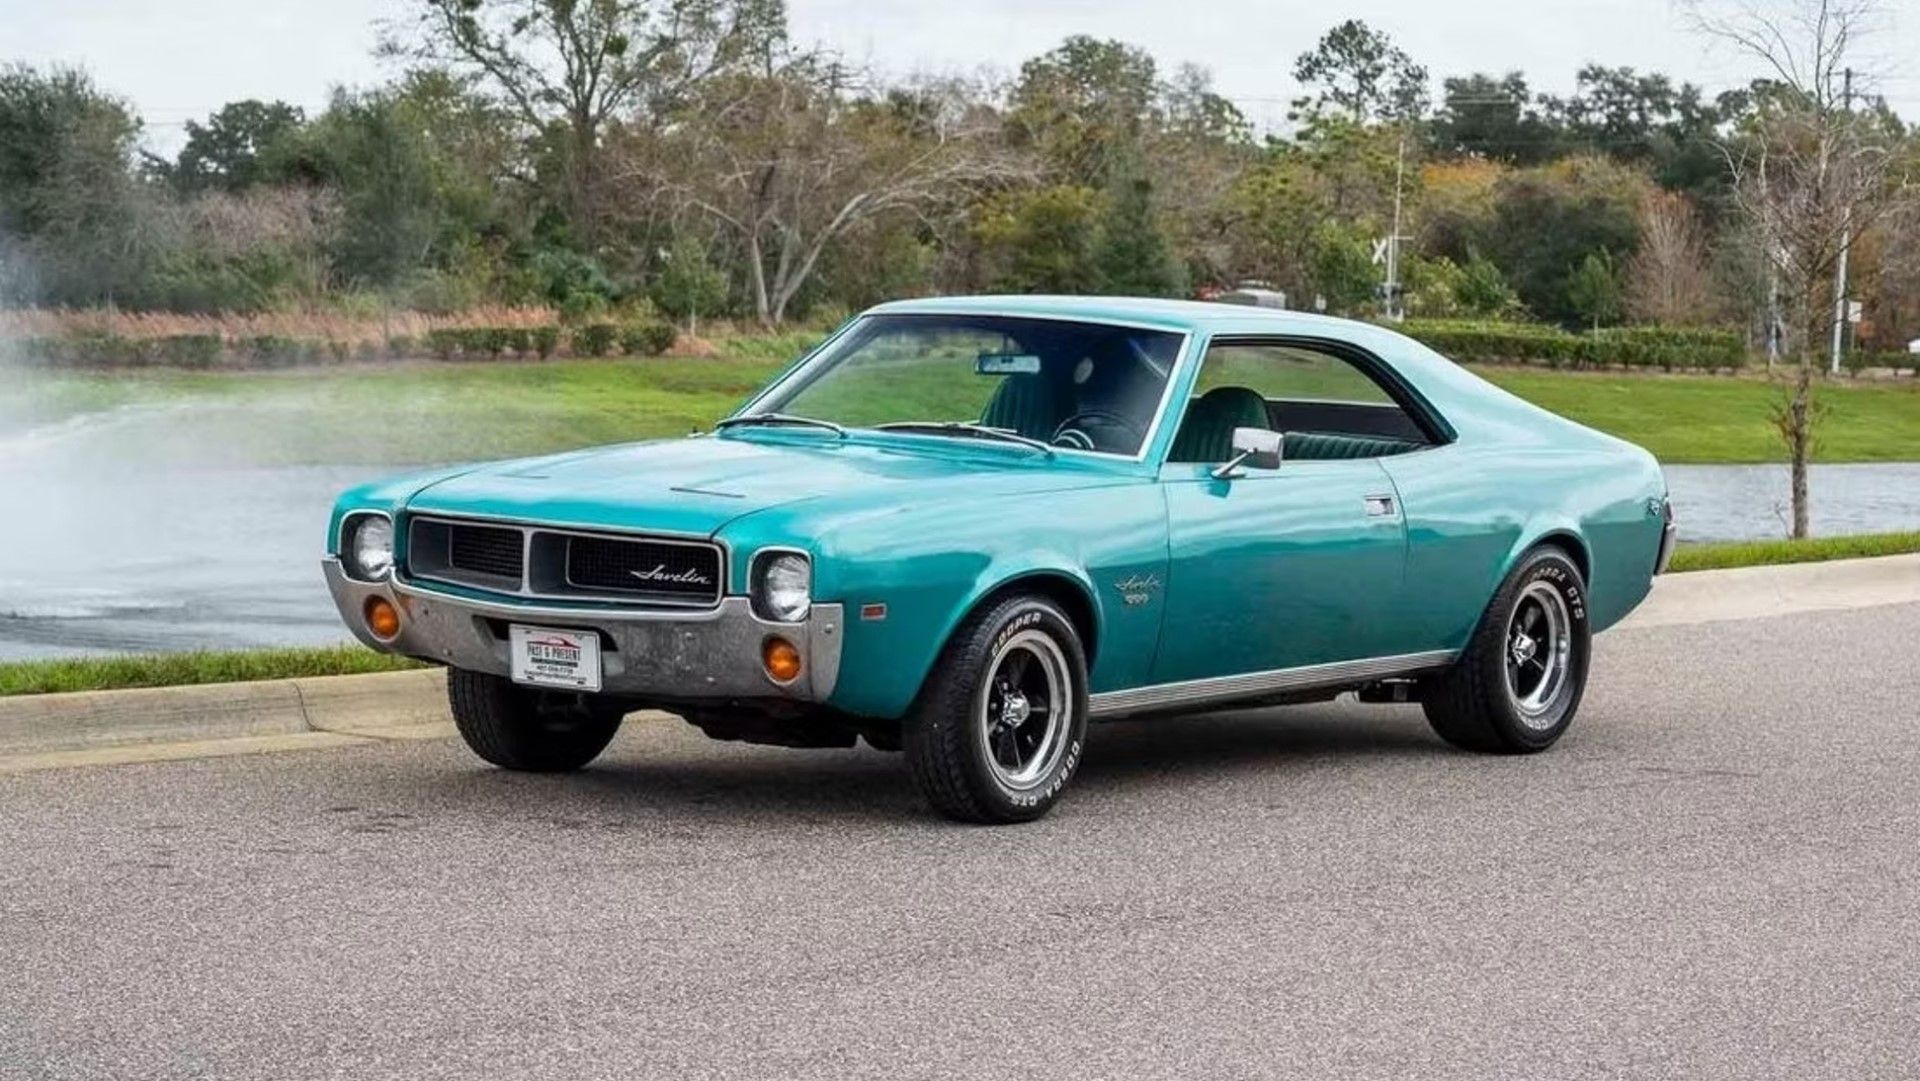 1968 AMC Javelin Factory 4 Speed, front quarter view